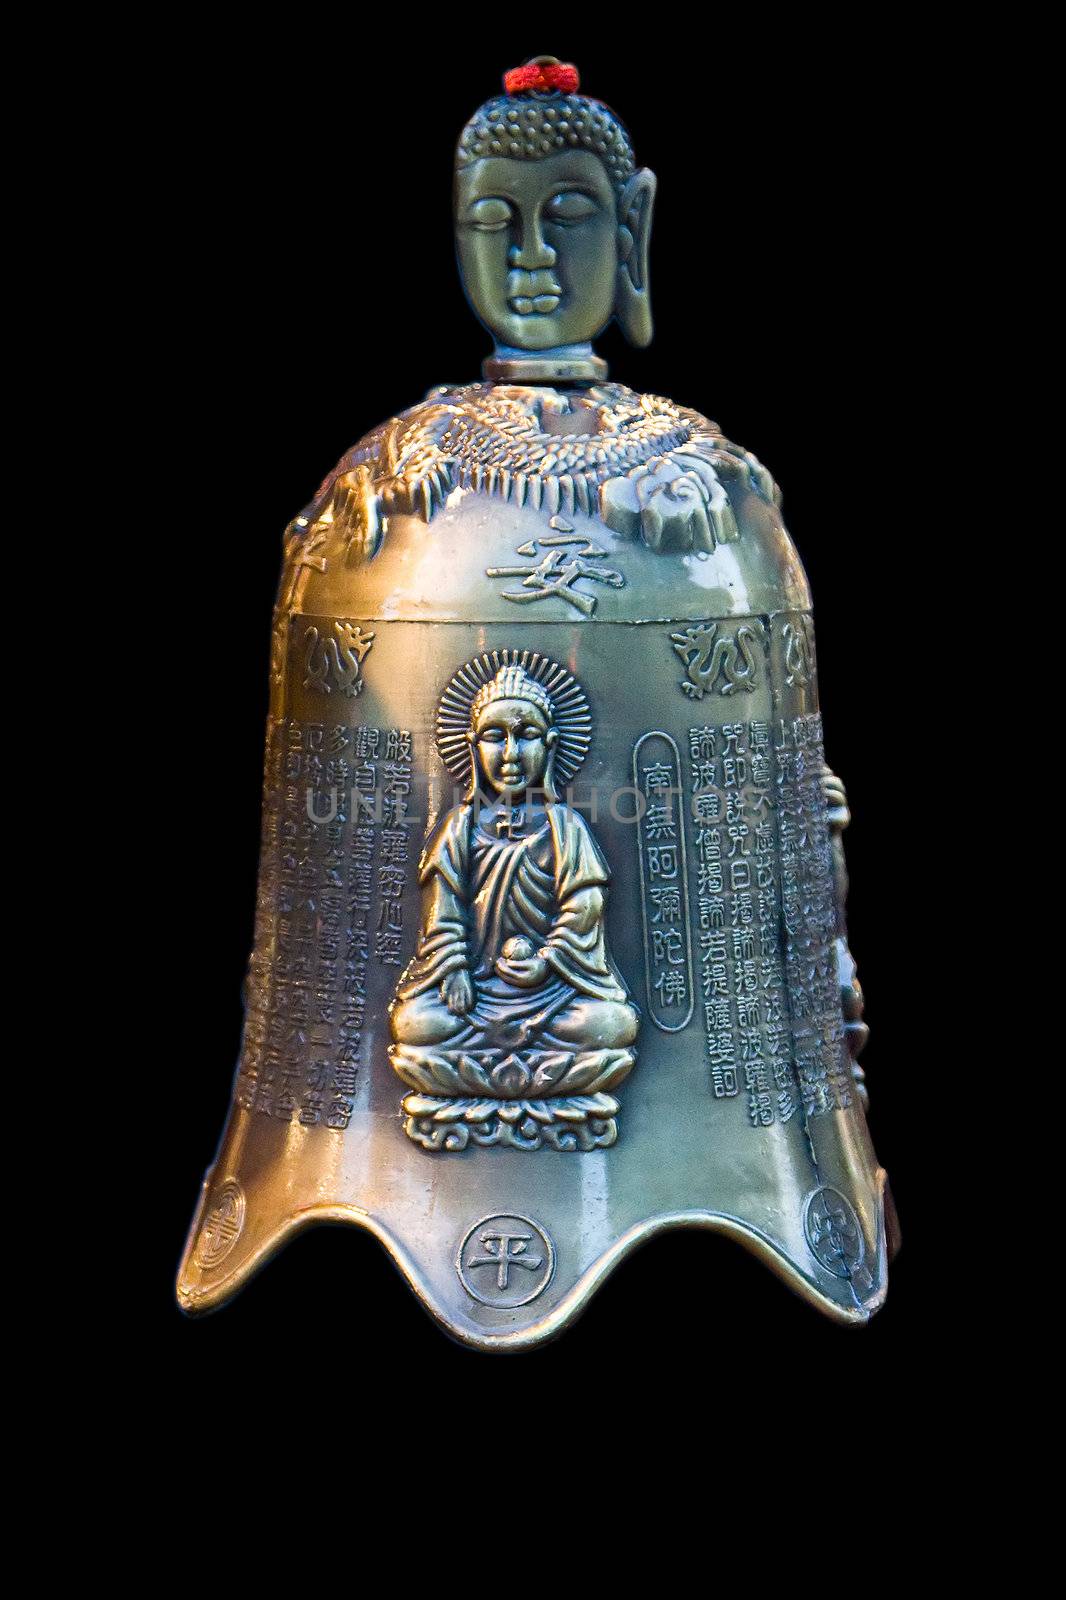 A bronze bell with Chinese characters and an image of Buddha sitting in the lotus position and the face of Buddha as handle, isolated on black